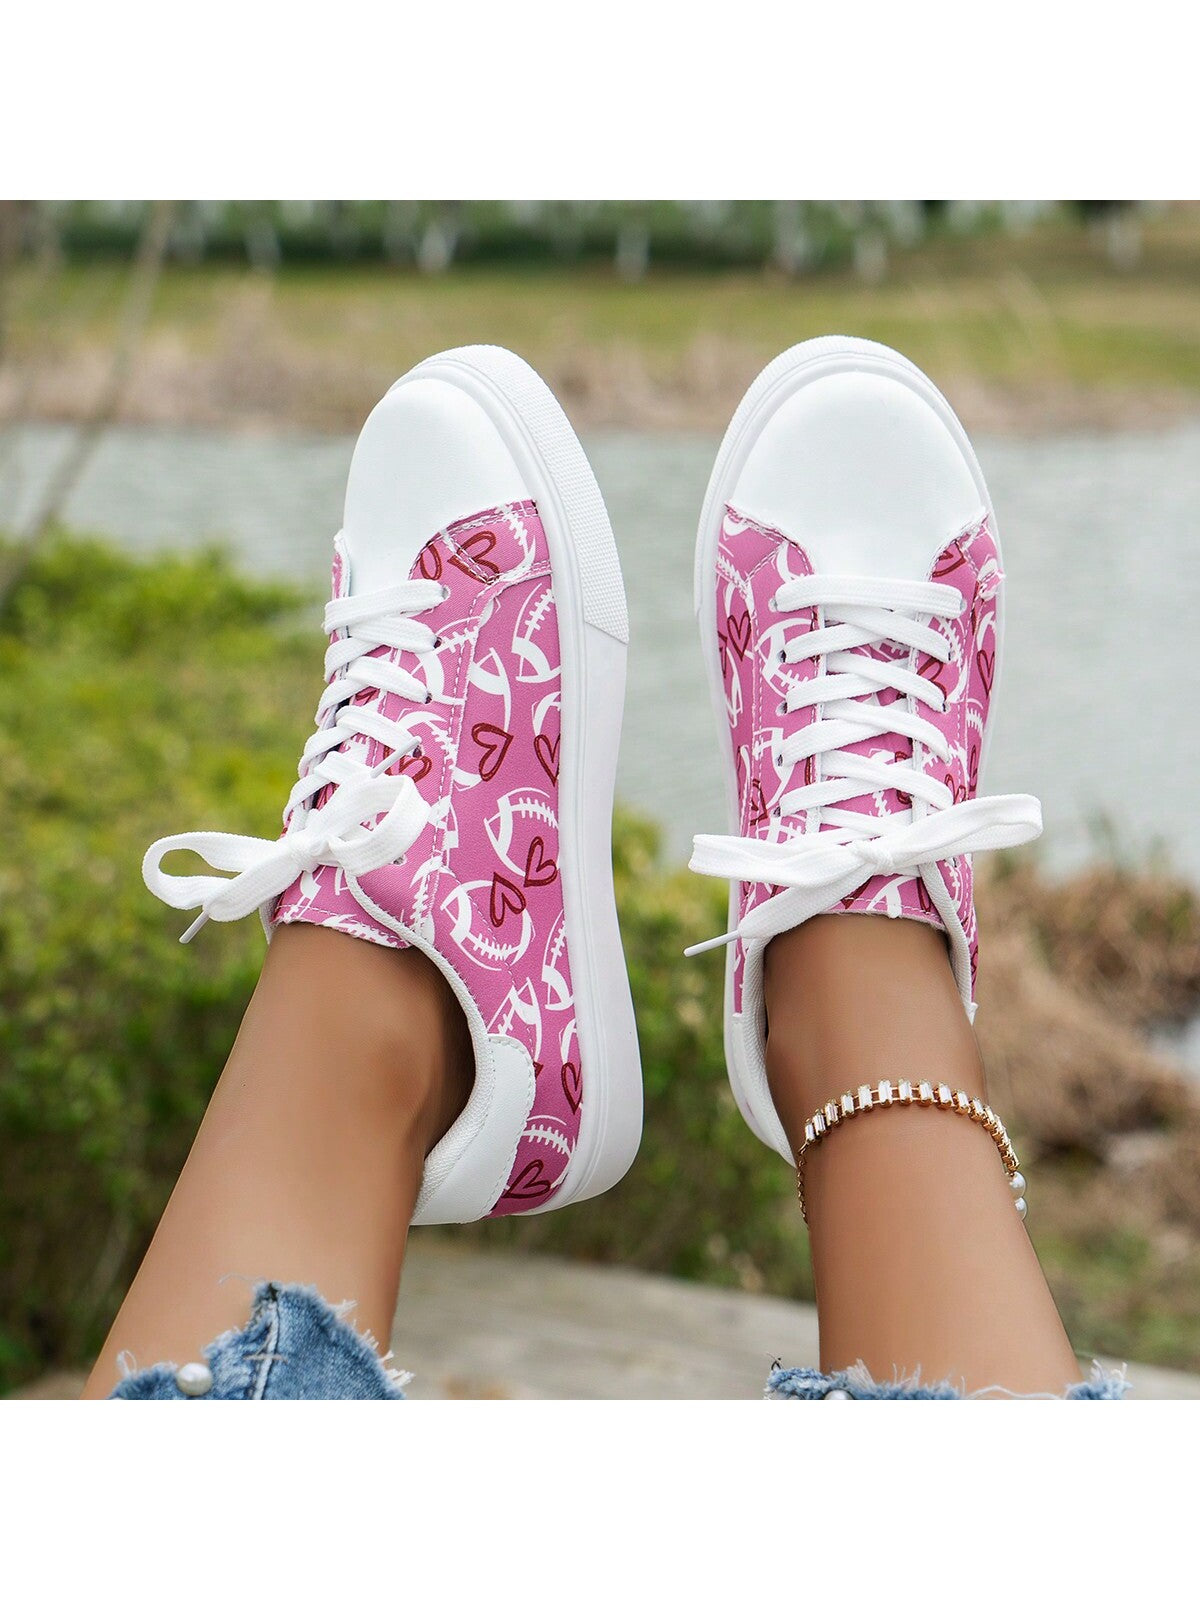 2024 Women Low Cut Fashion Single Shoes Sports Casual Shoes Student Shoes White Shoes-Hot Pink-2